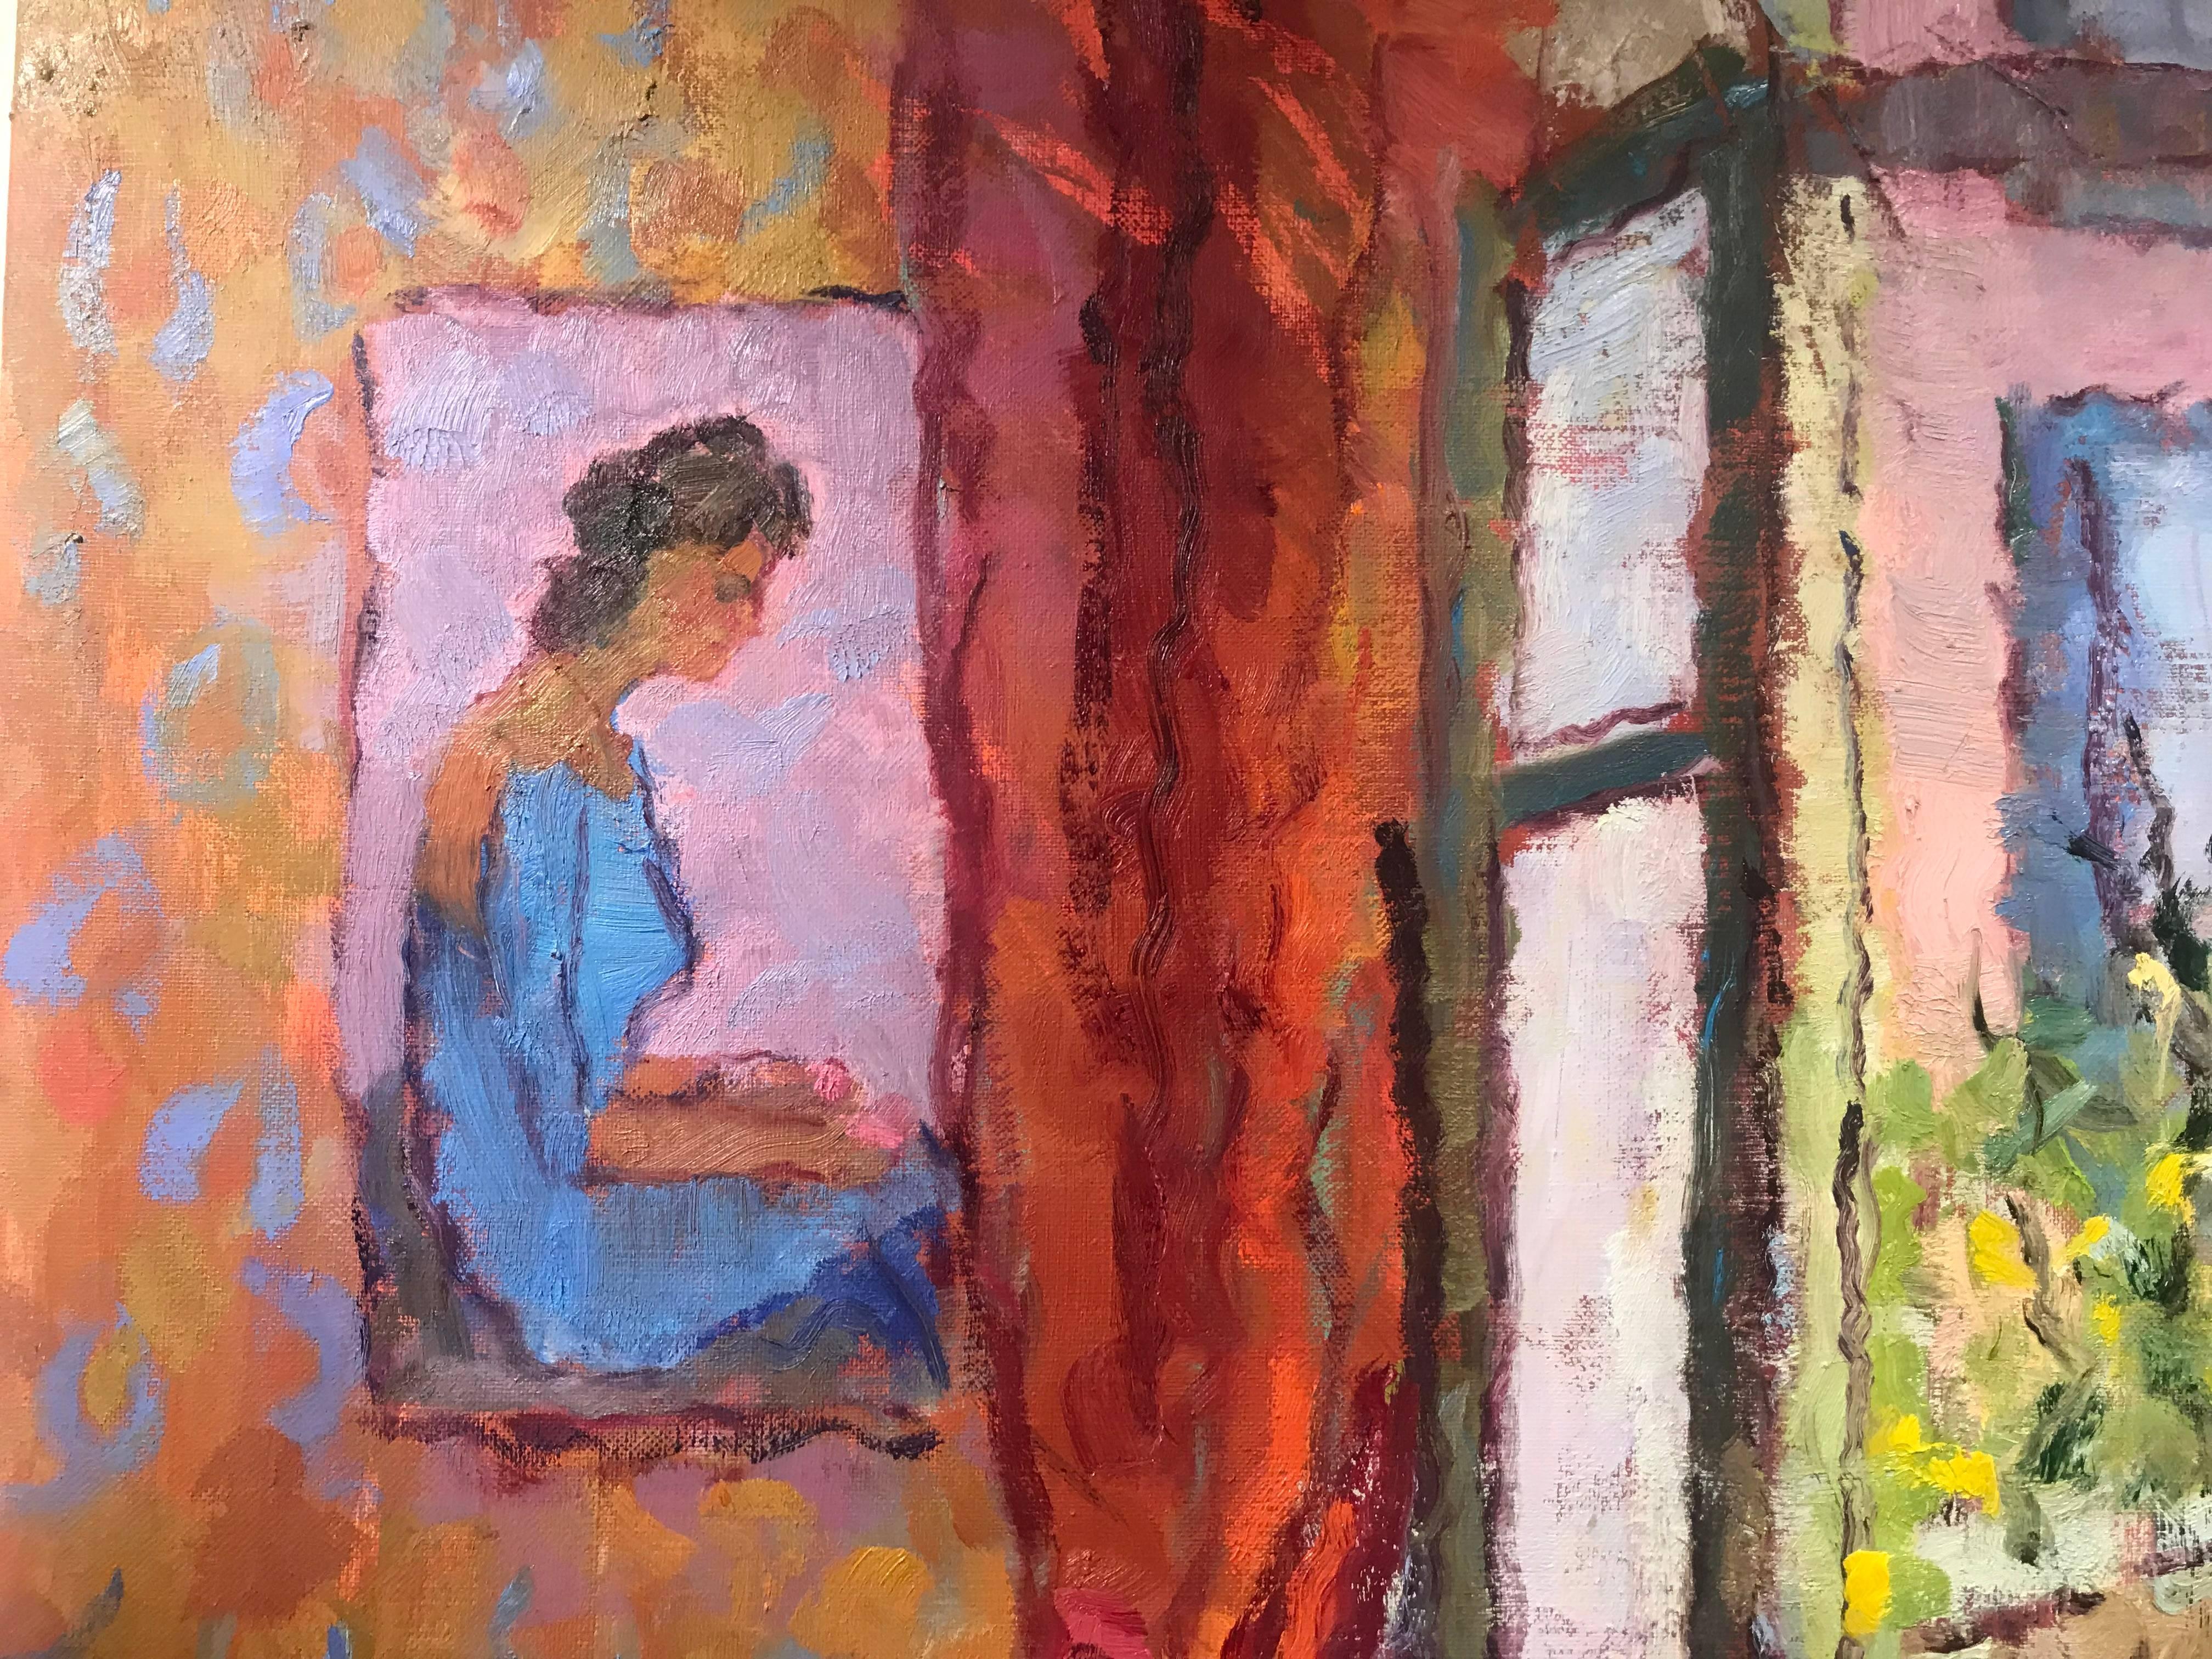 'Une Postcard of Coco's Terrace' is a Post-Impressionist square format interior painting created by American artist Alice Williams in 2018. Featuring a vibrant palette made among others of warm reds, oranges, pinks and blues, this painting features